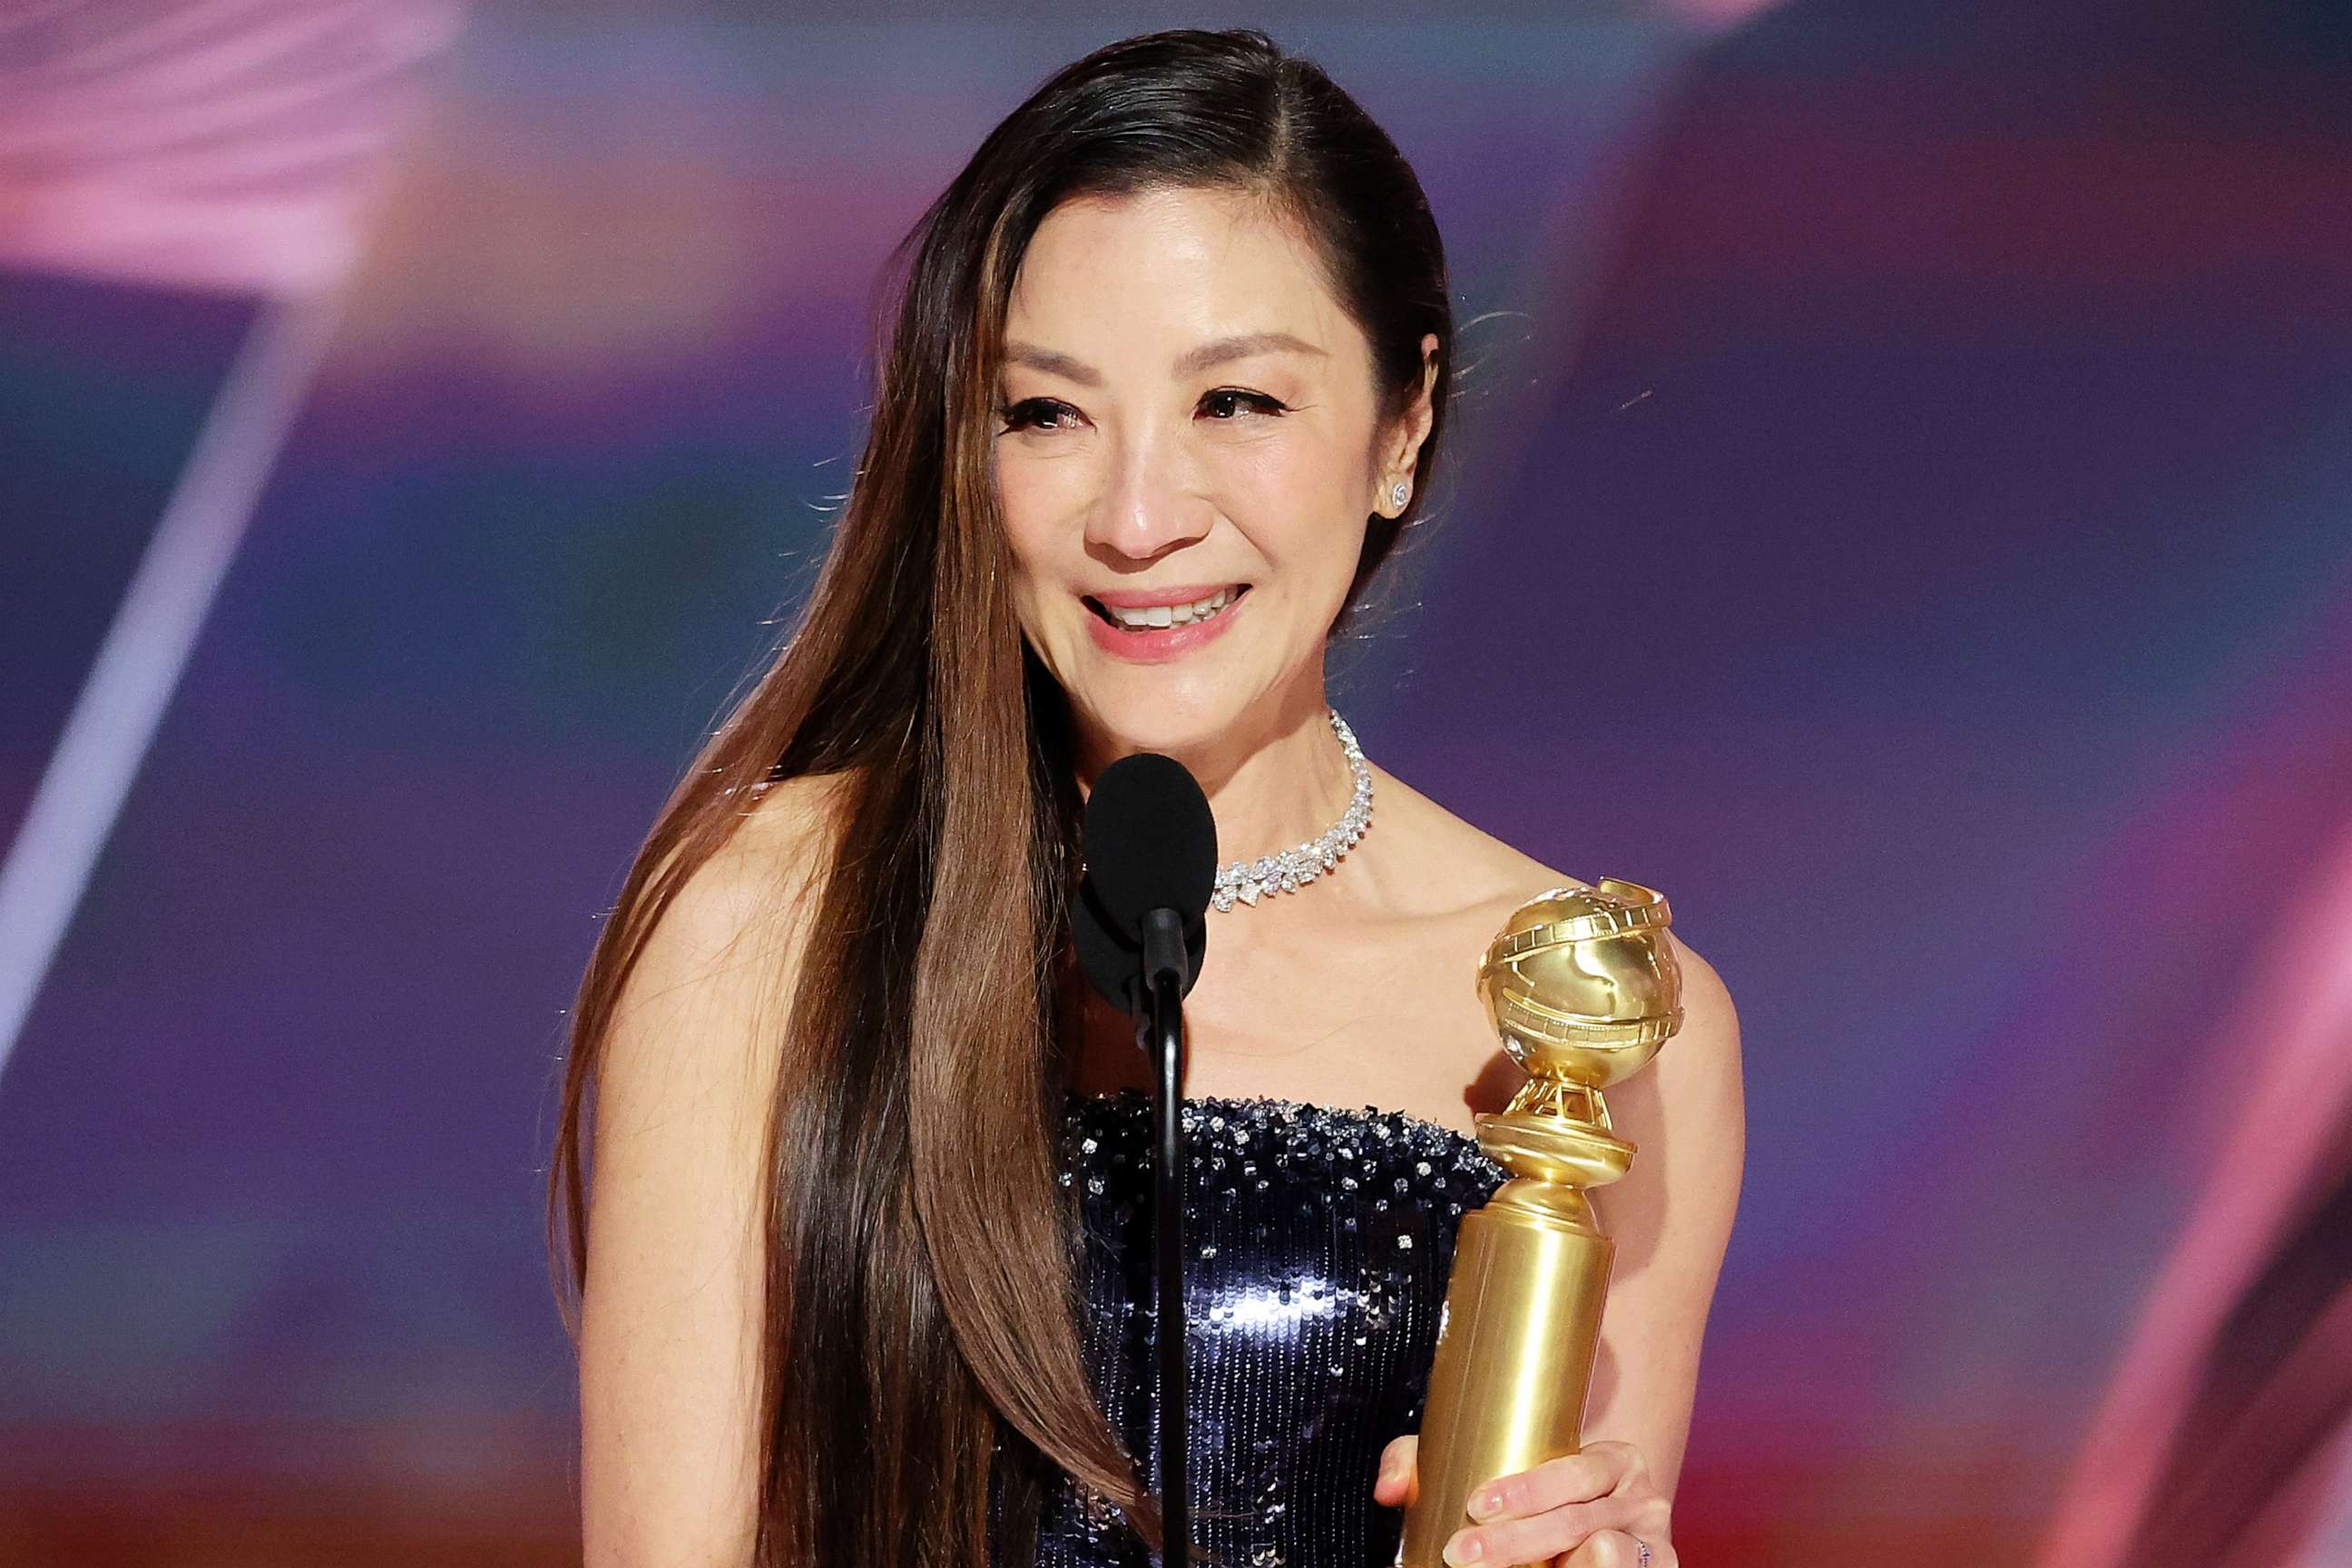 PHOTO: In this handout photo provided by NBC, Michelle Yeoh accepts the Best Actress in a Motion Picture Musical or Comedy award onstage during the 80th Annual Golden Globe Awards, on Jan. 10, 2023, in Beverly Hills, Calif.